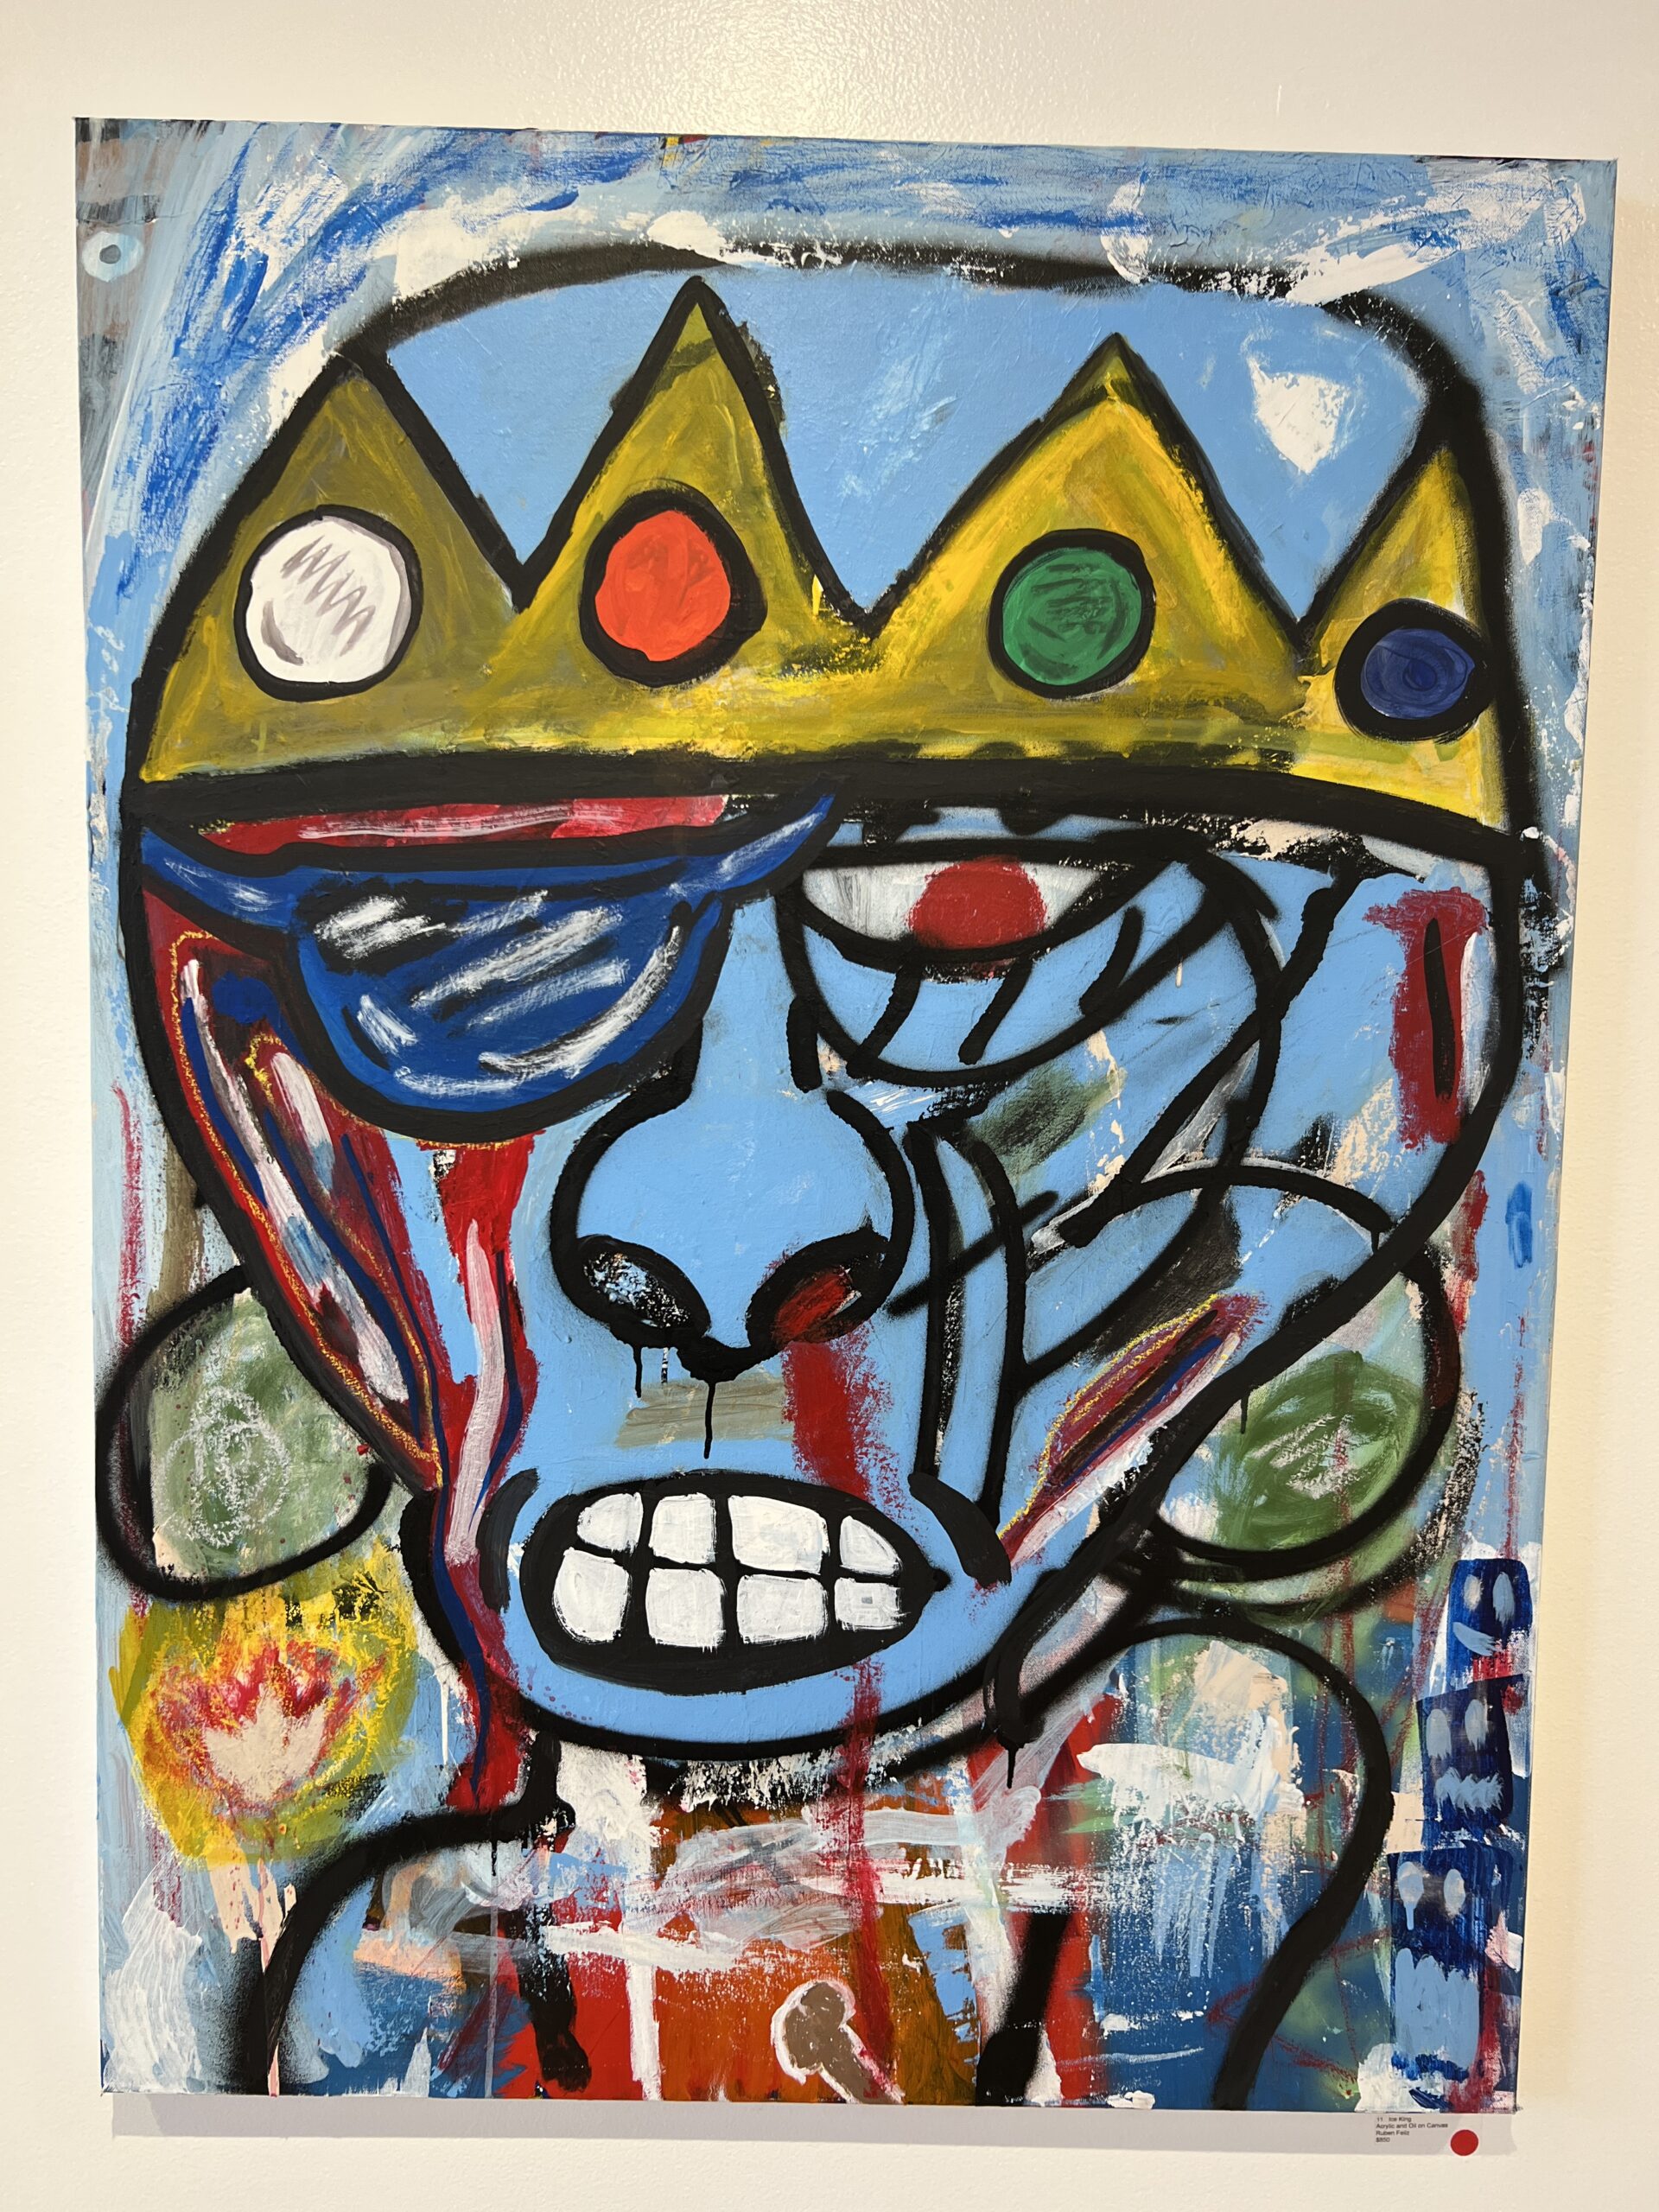 a painting of a clown wearing a crown.